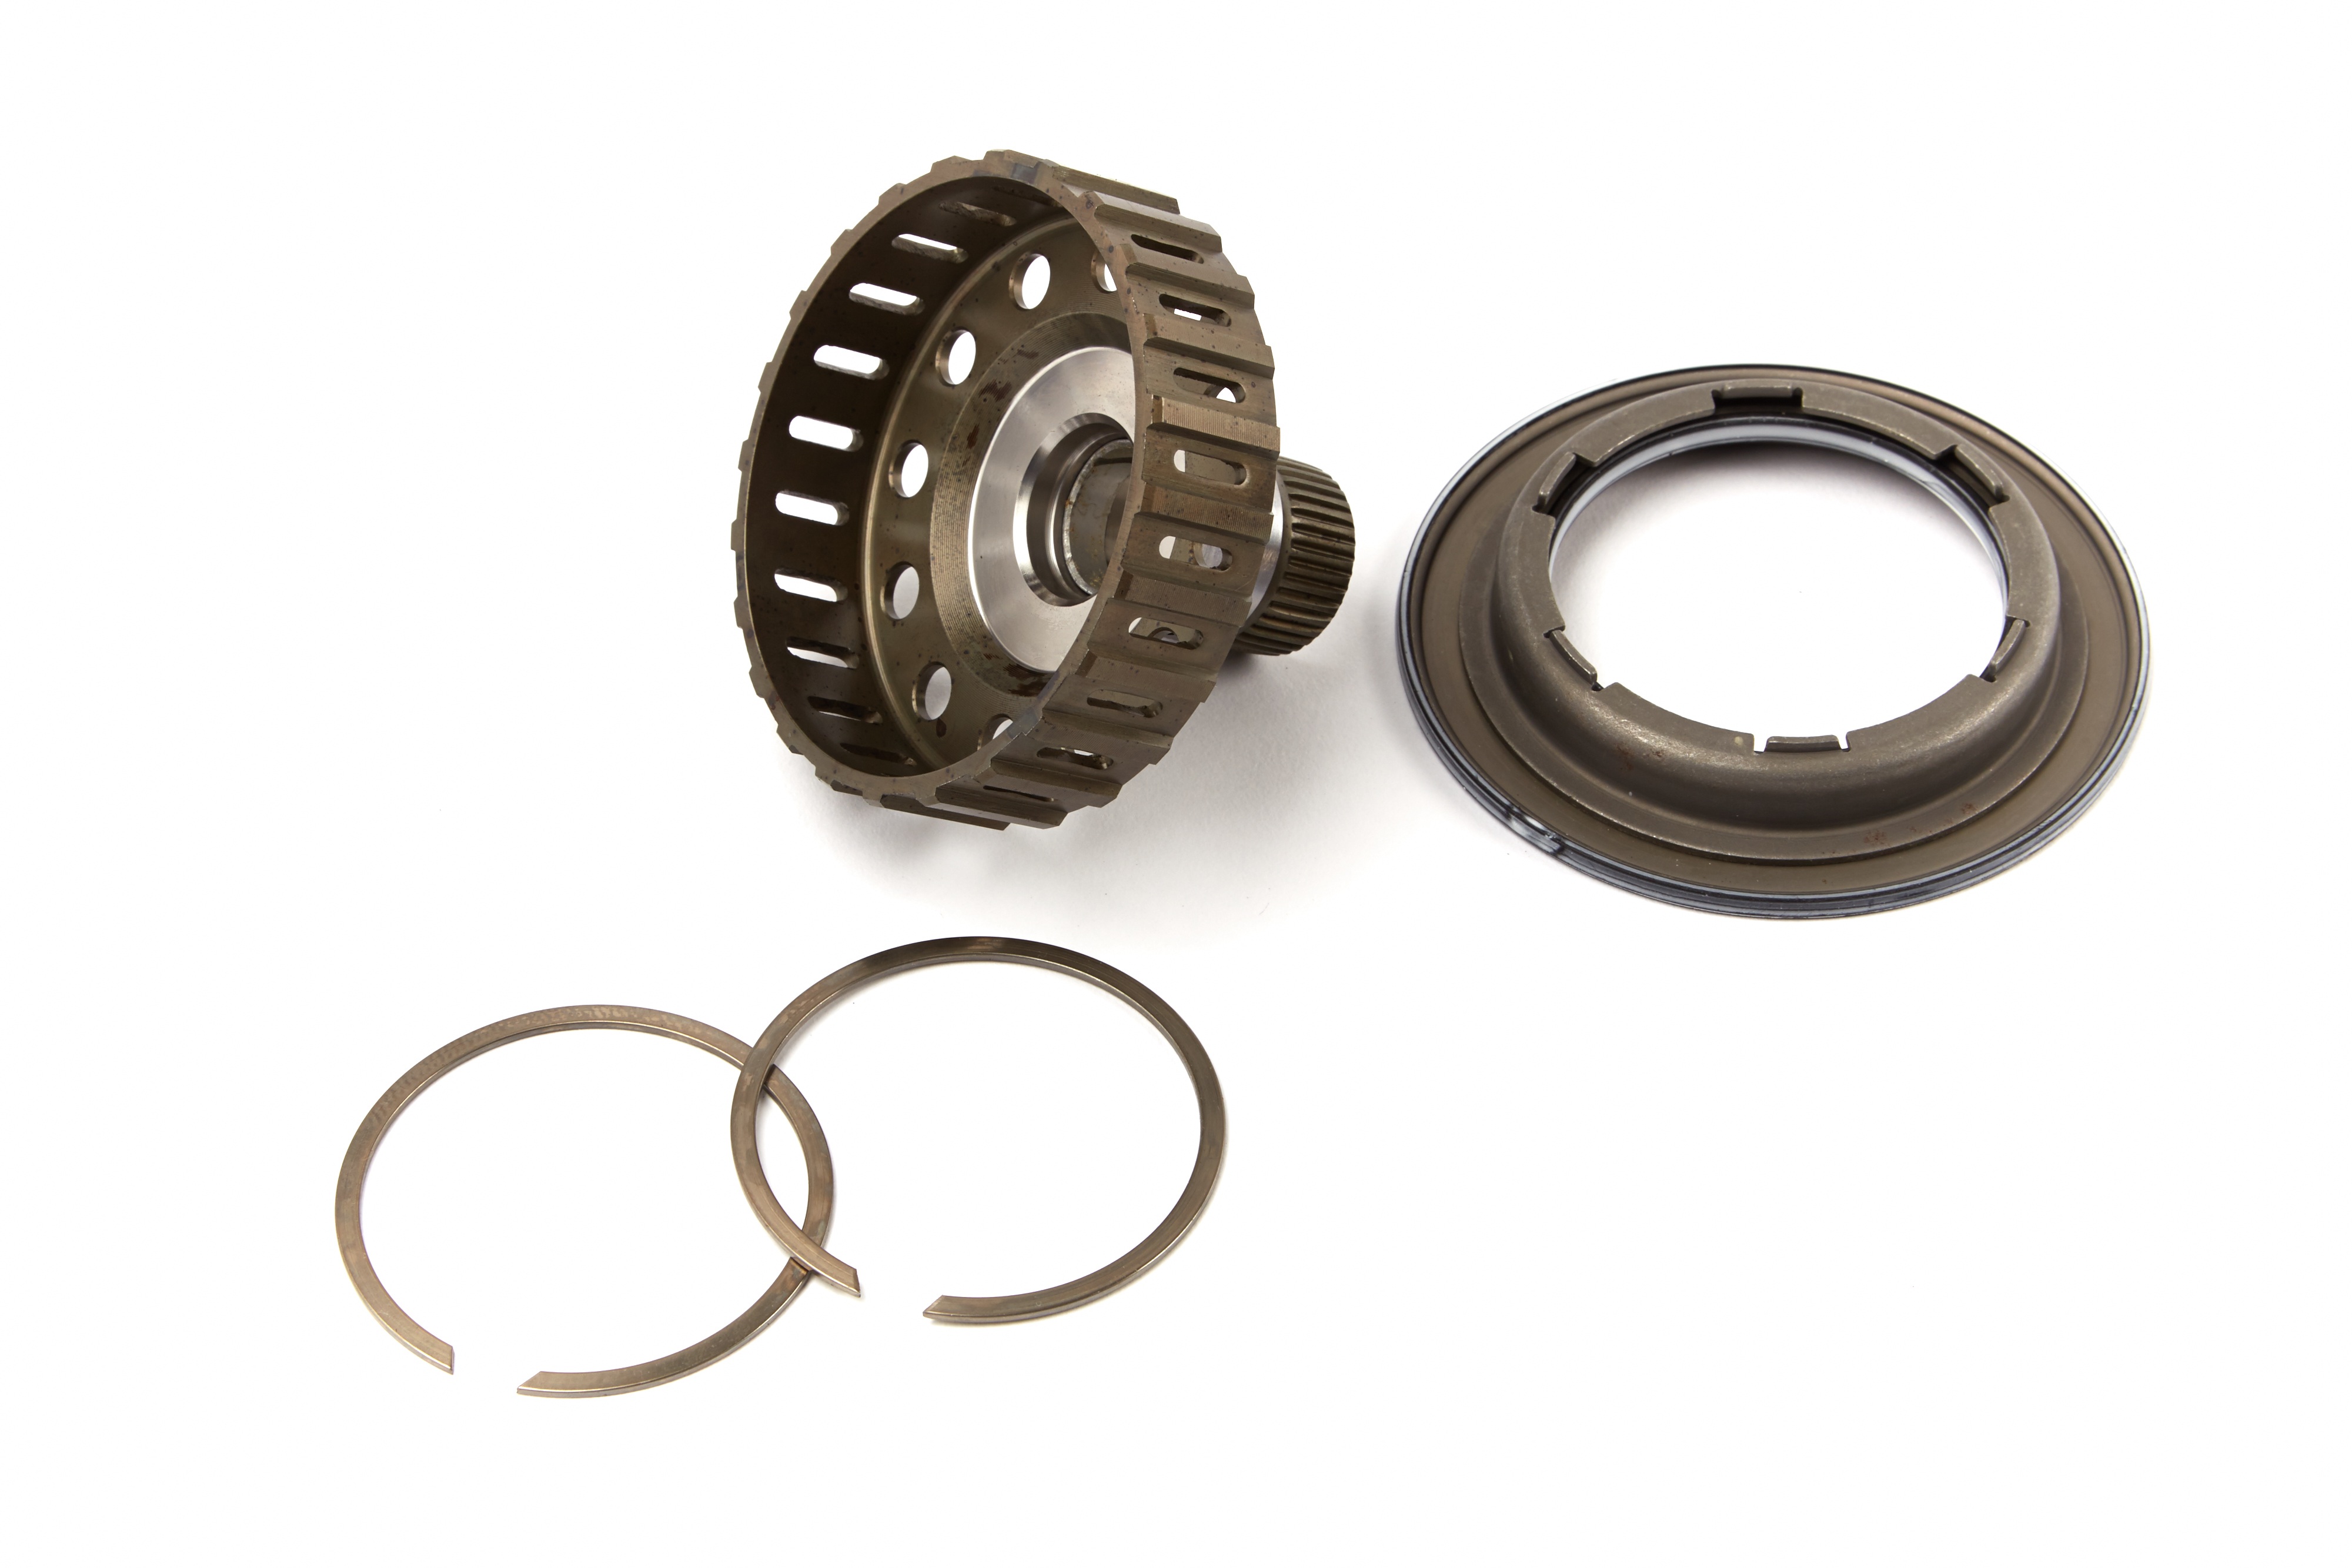 GM GENUINE PARTS - Automatic Transmission Reaction Hub and 4-5-6 Clutch Piston Dam Kit - GMP 24270796